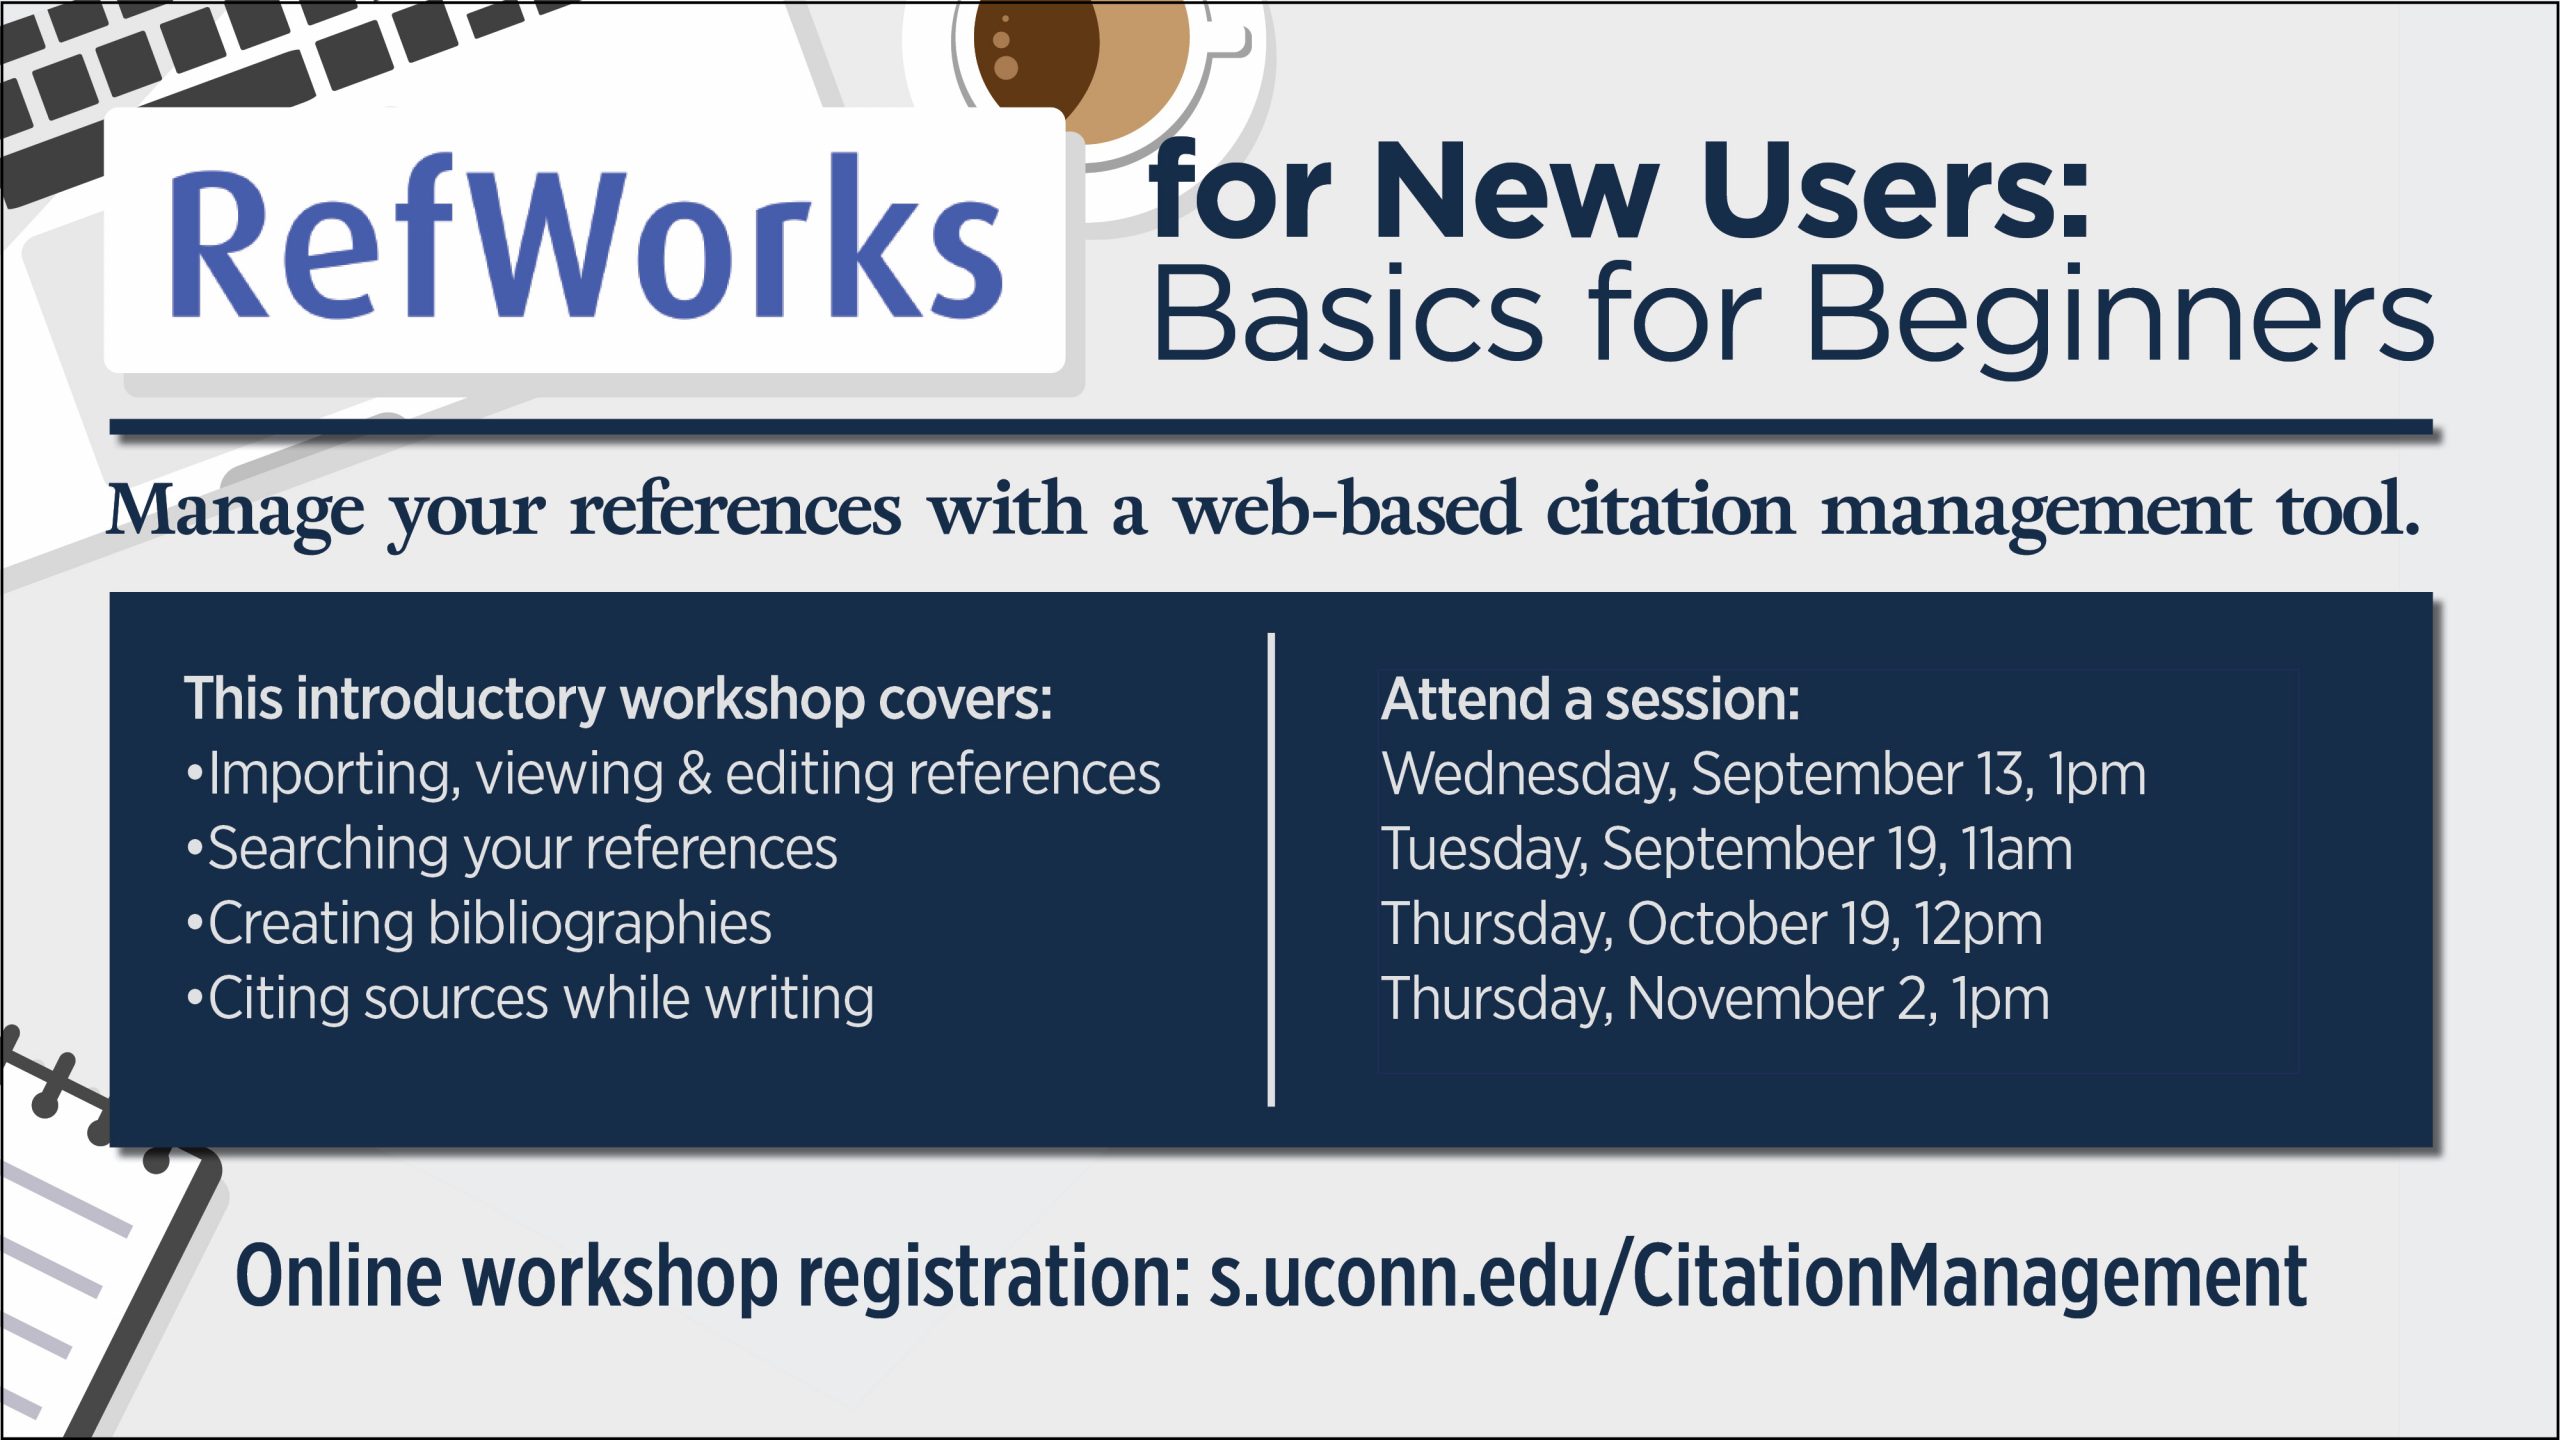 RefWorks for New Users: Basics for Beginners workshops available throughout the Fall 2023 semester. Register today at s.uconn.edu/CitationMaagement